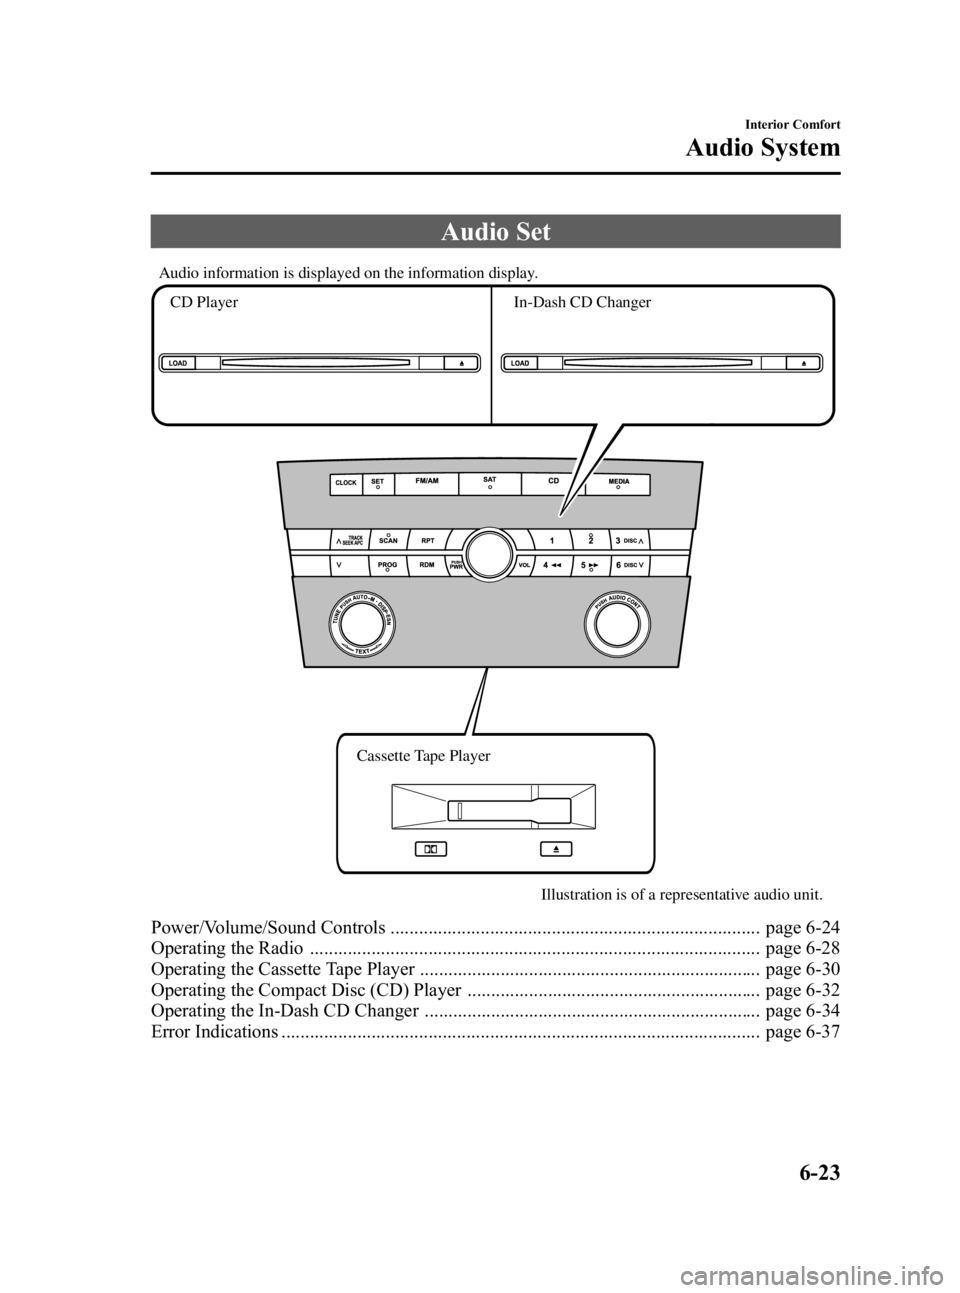 MAZDA MODEL 3 5-DOOR 2006  Owners Manual Black plate (193,1)
Audio Set
CD Player  In-Dash CD Changer
Cassette Tape Player Illustration is of a representative audio unit.
Audio information is displayed on the information display.
Power/Volume